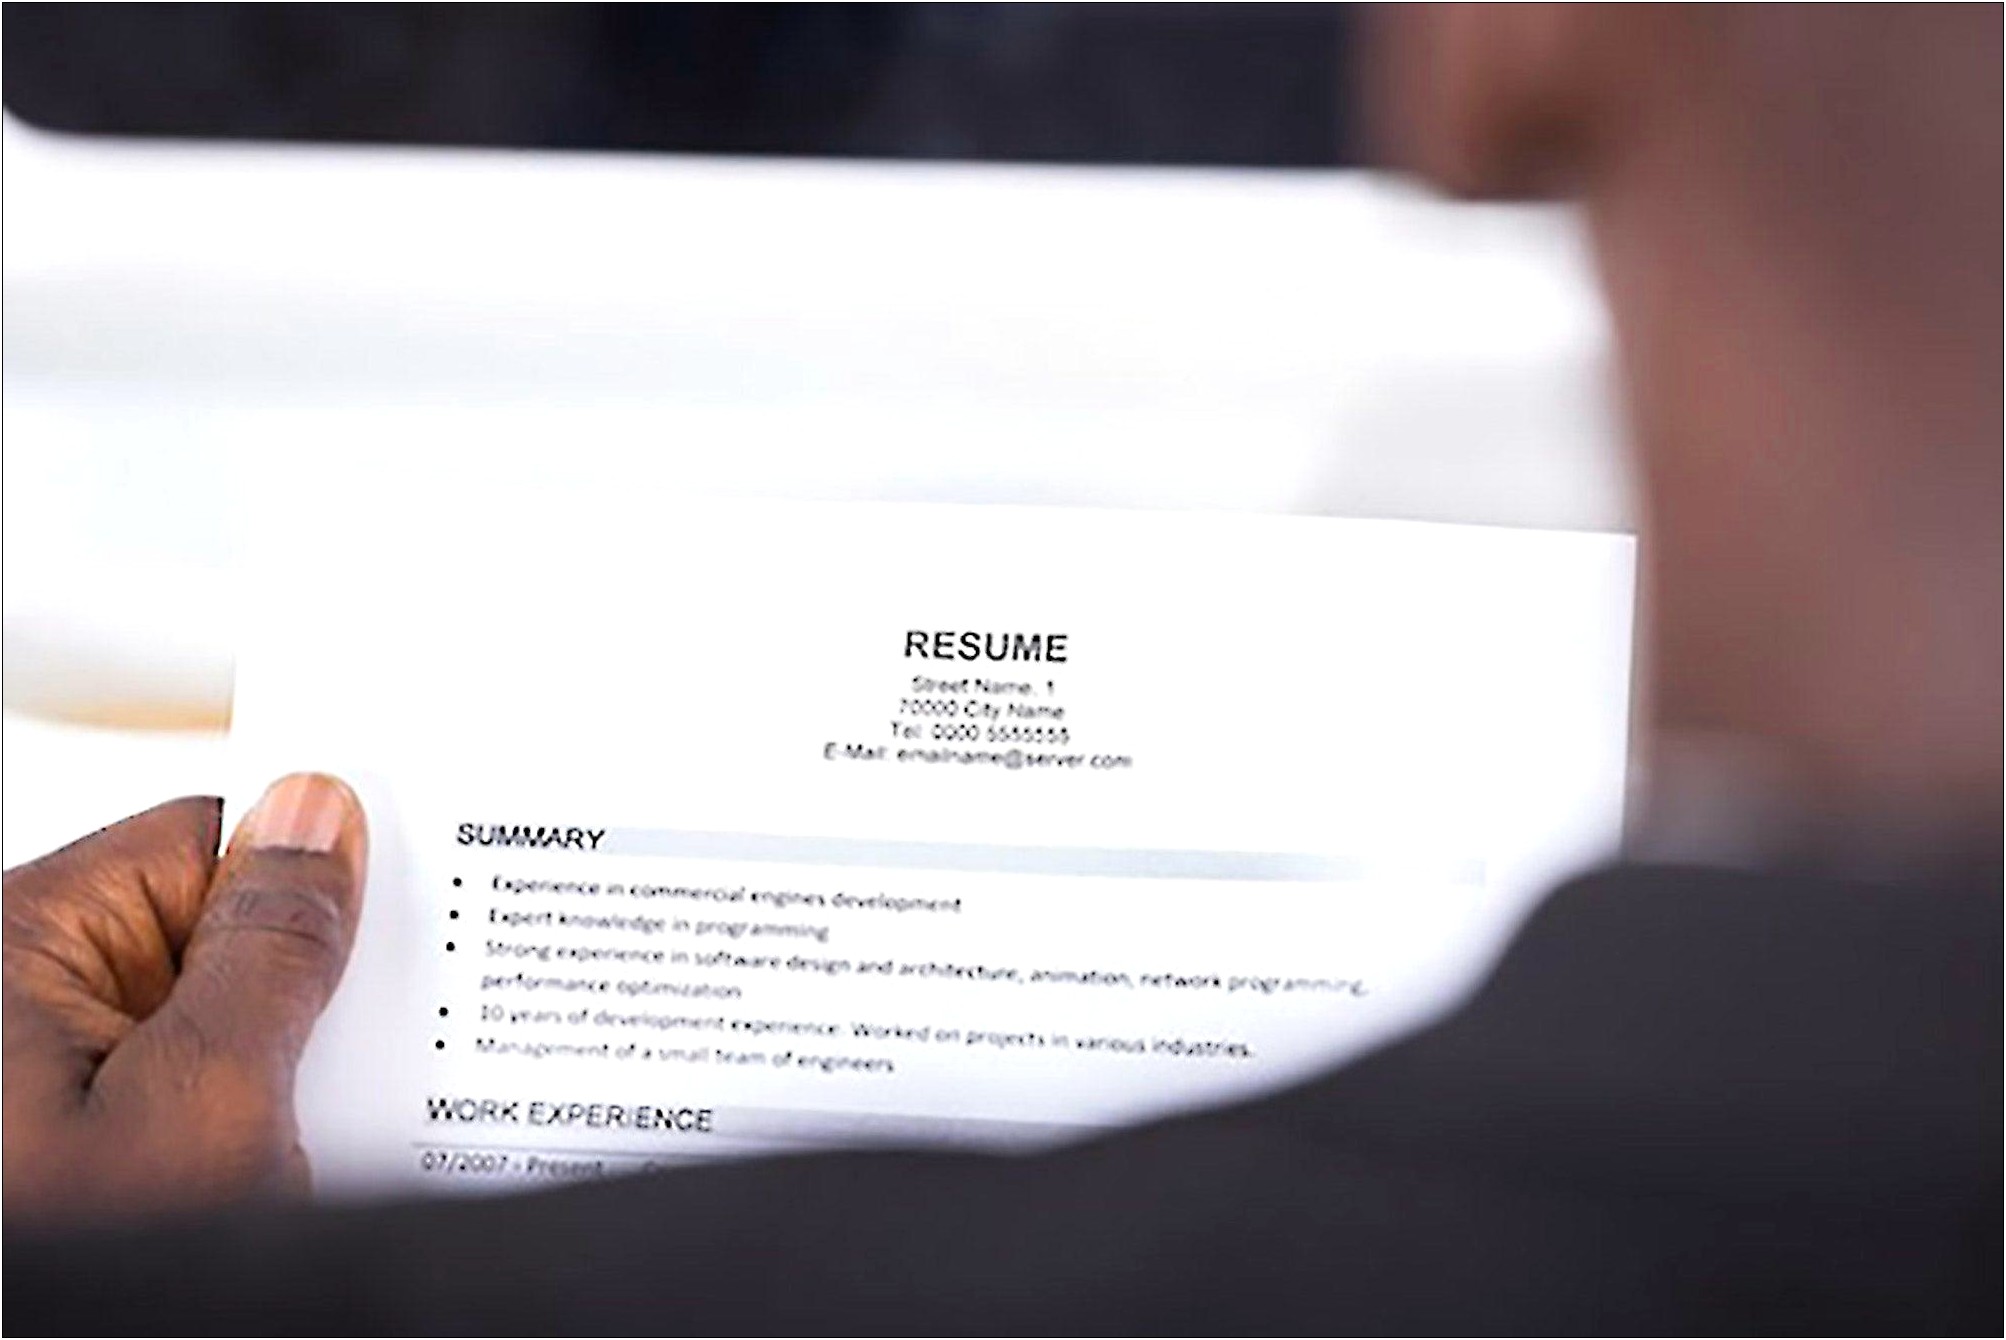 Does Every Job Require A Resume